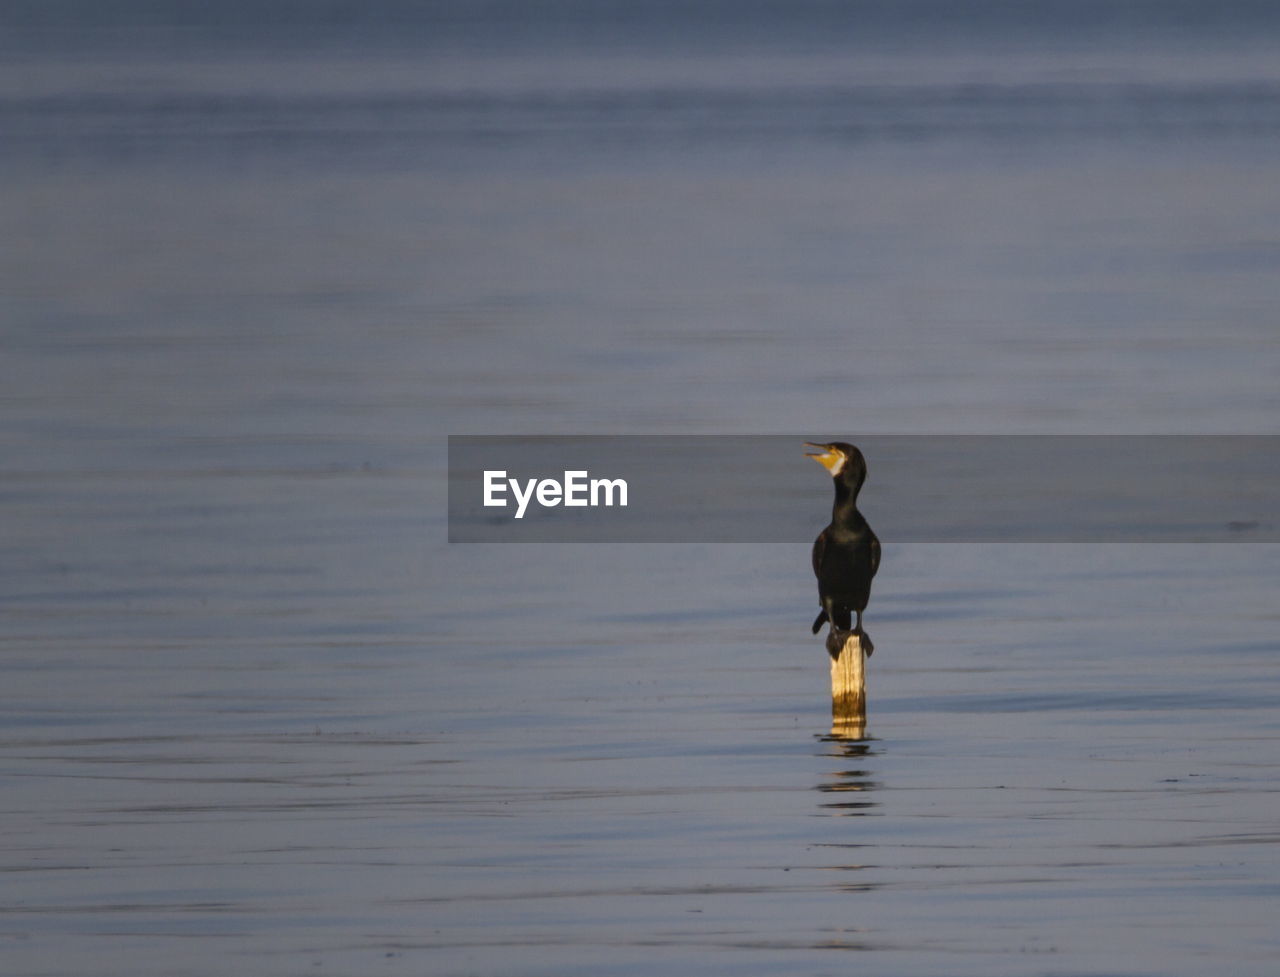 Great cormorant, phalacrocorax carbo, standing peacefully on the lake while looking on the side